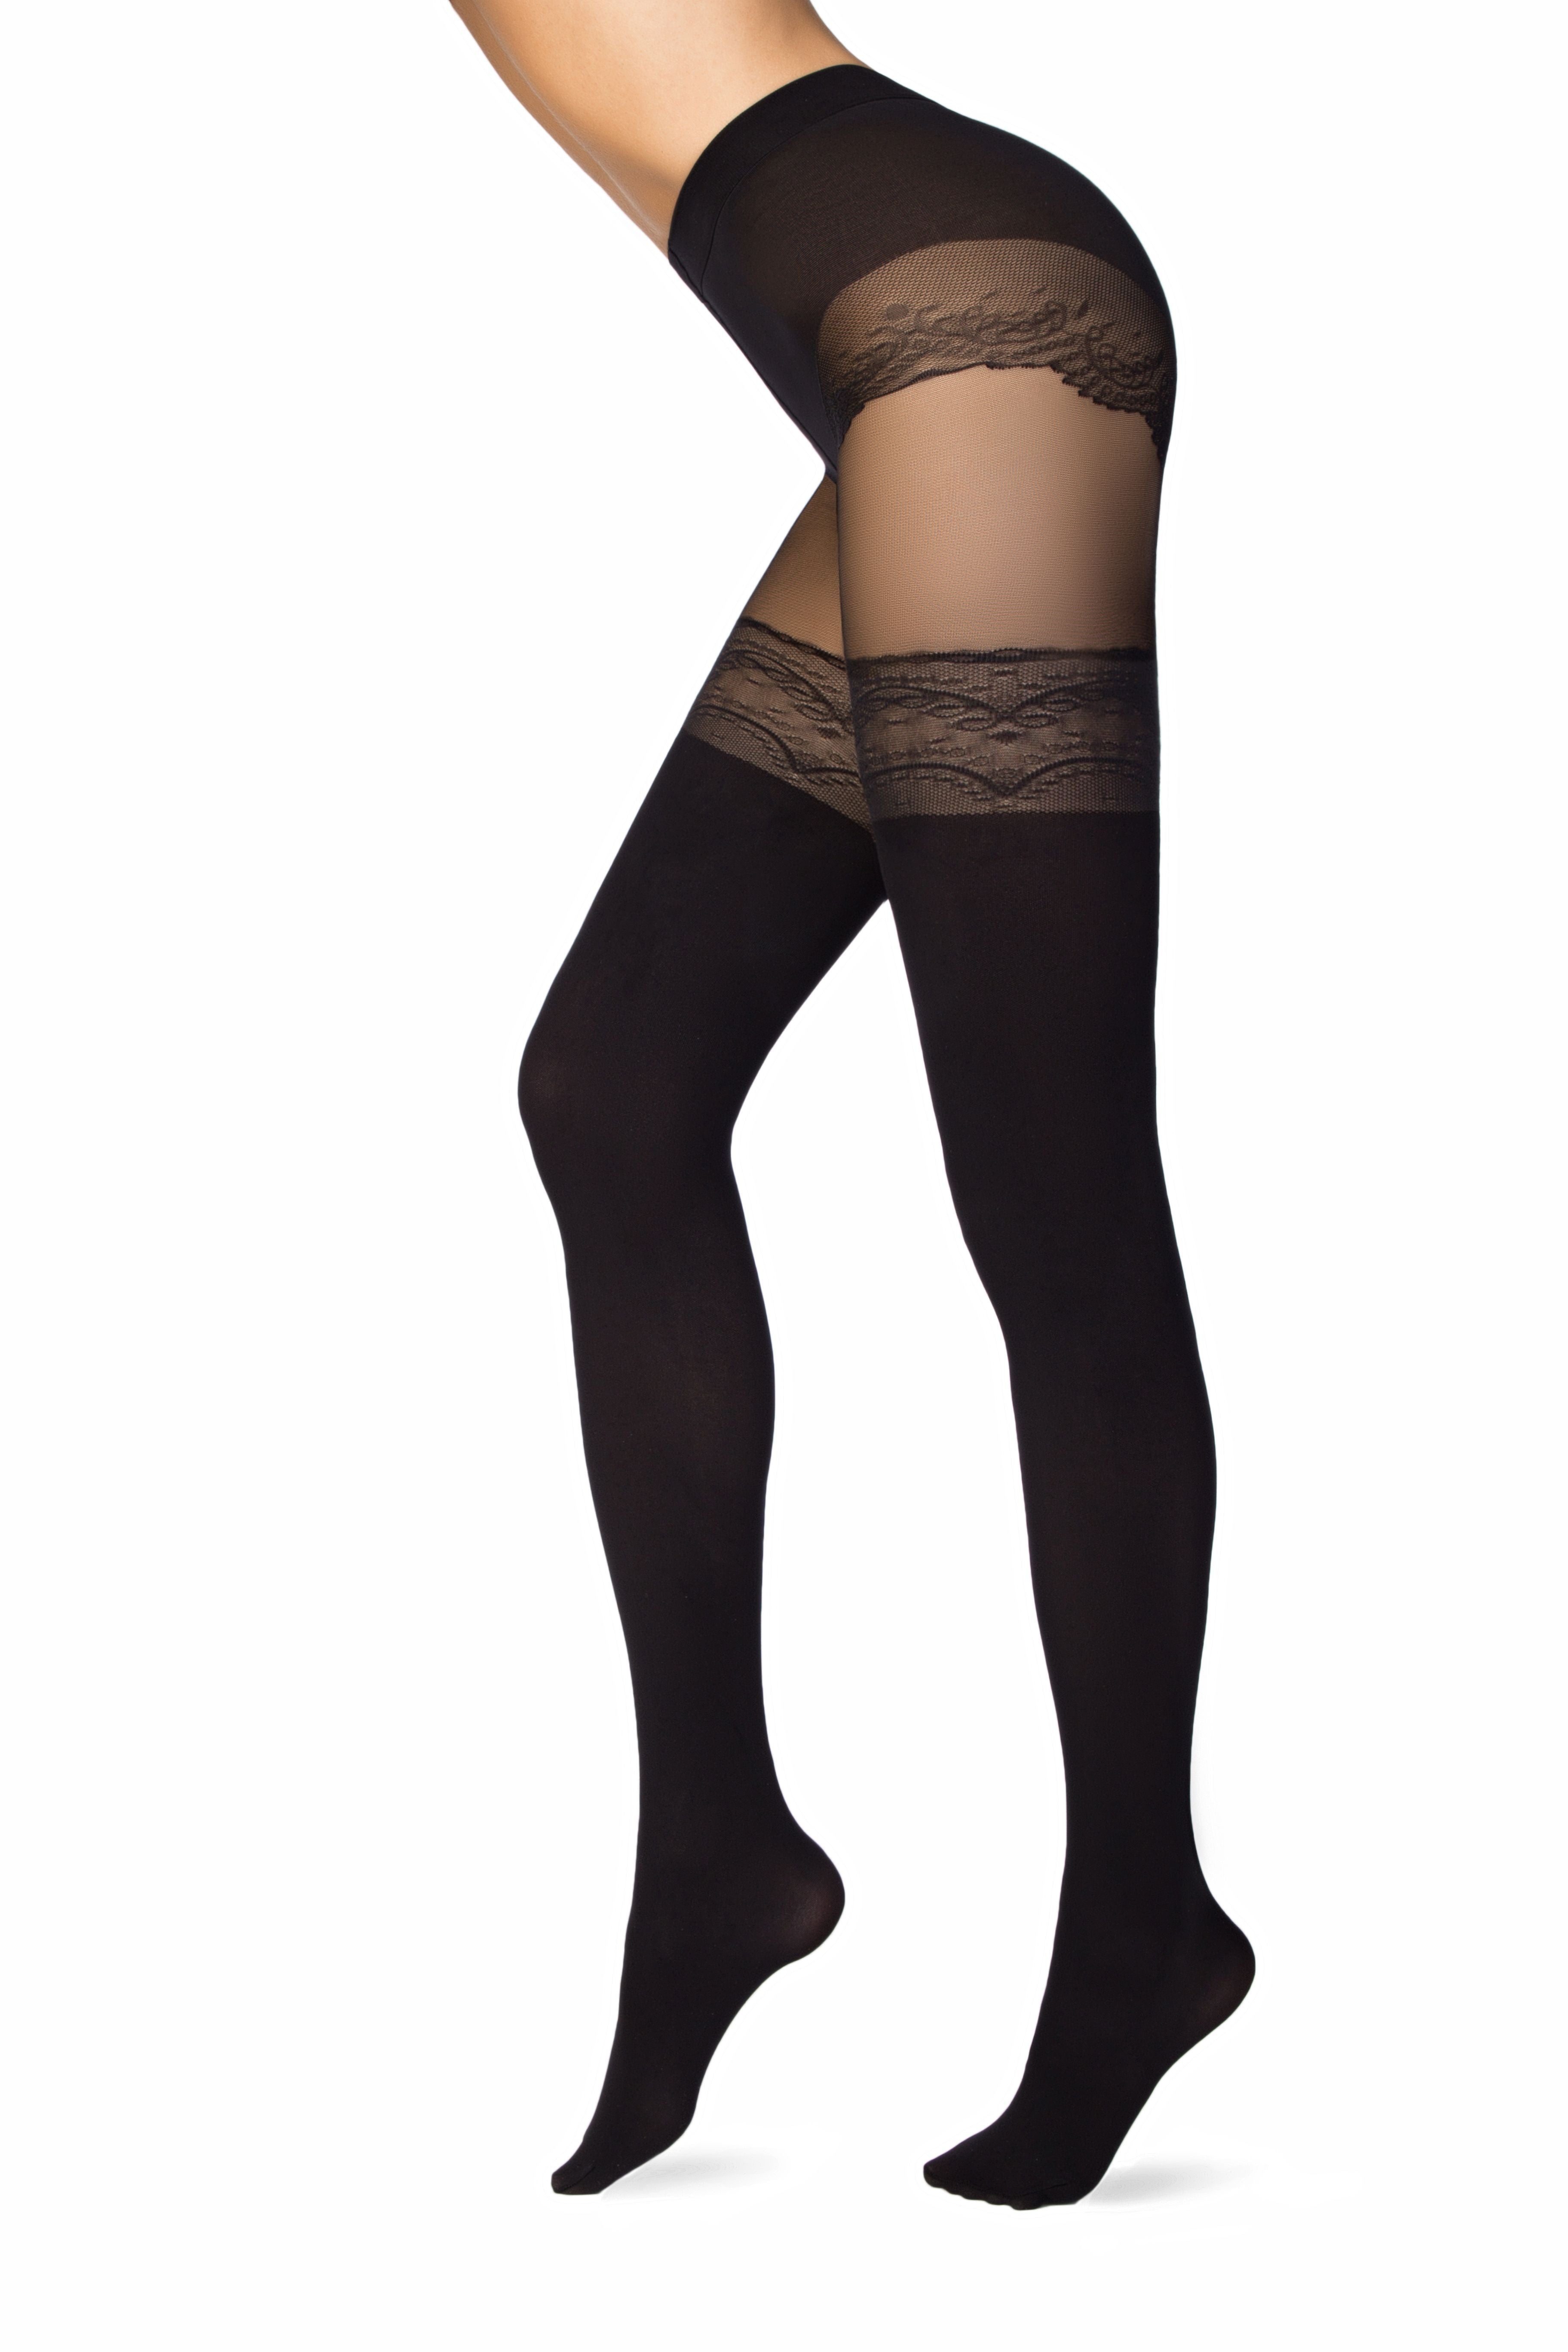 Suspenders sexy stockings hold-ups black tights pantyhose Delight by Conte